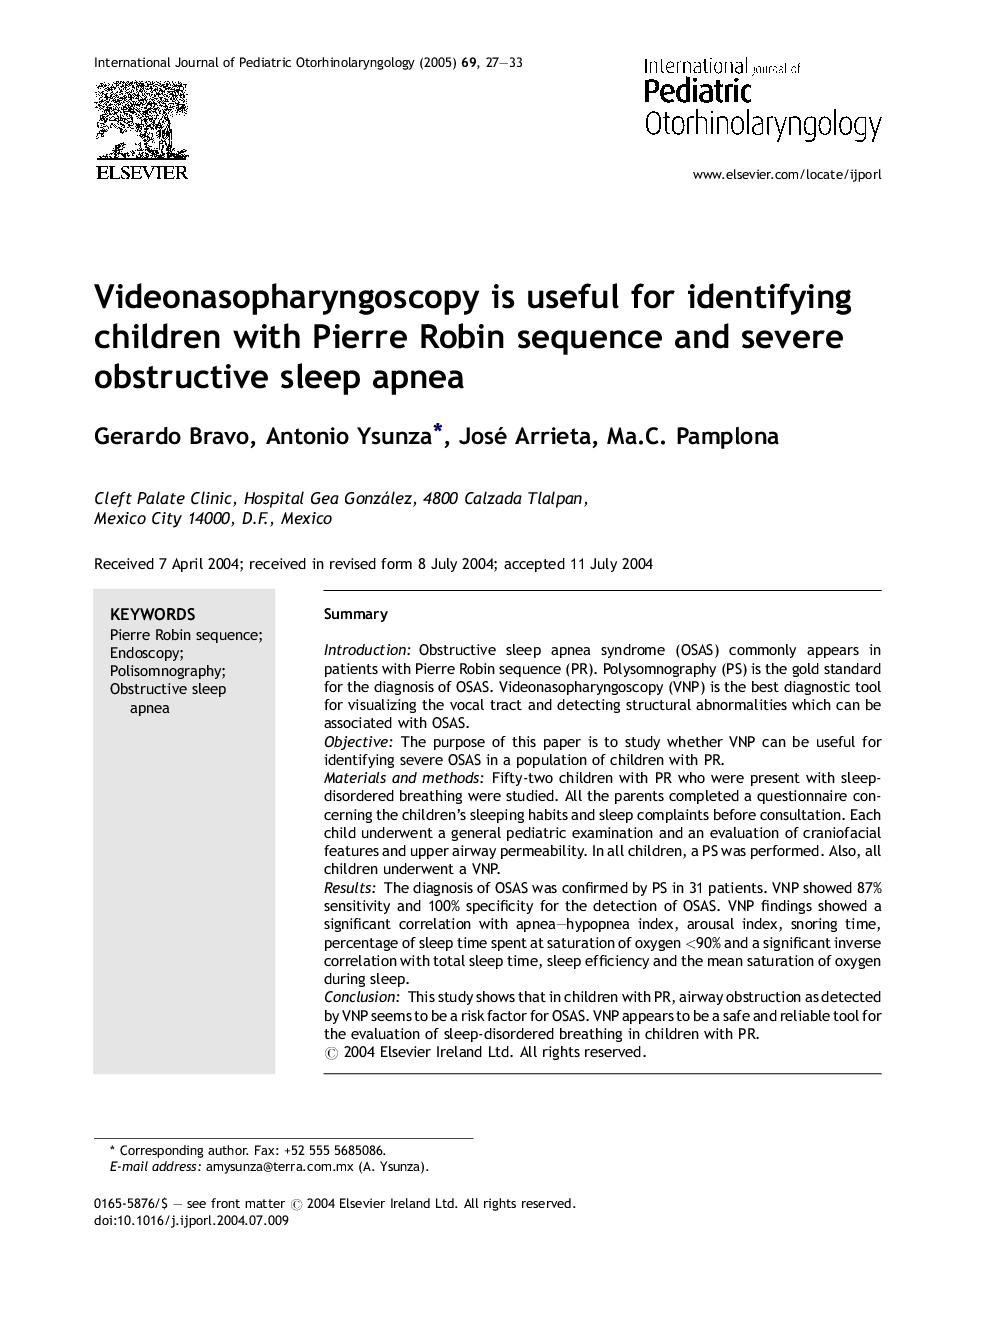 Videonasopharyngoscopy is useful for identifying children with Pierre Robin sequence and severe obstructive sleep apnea